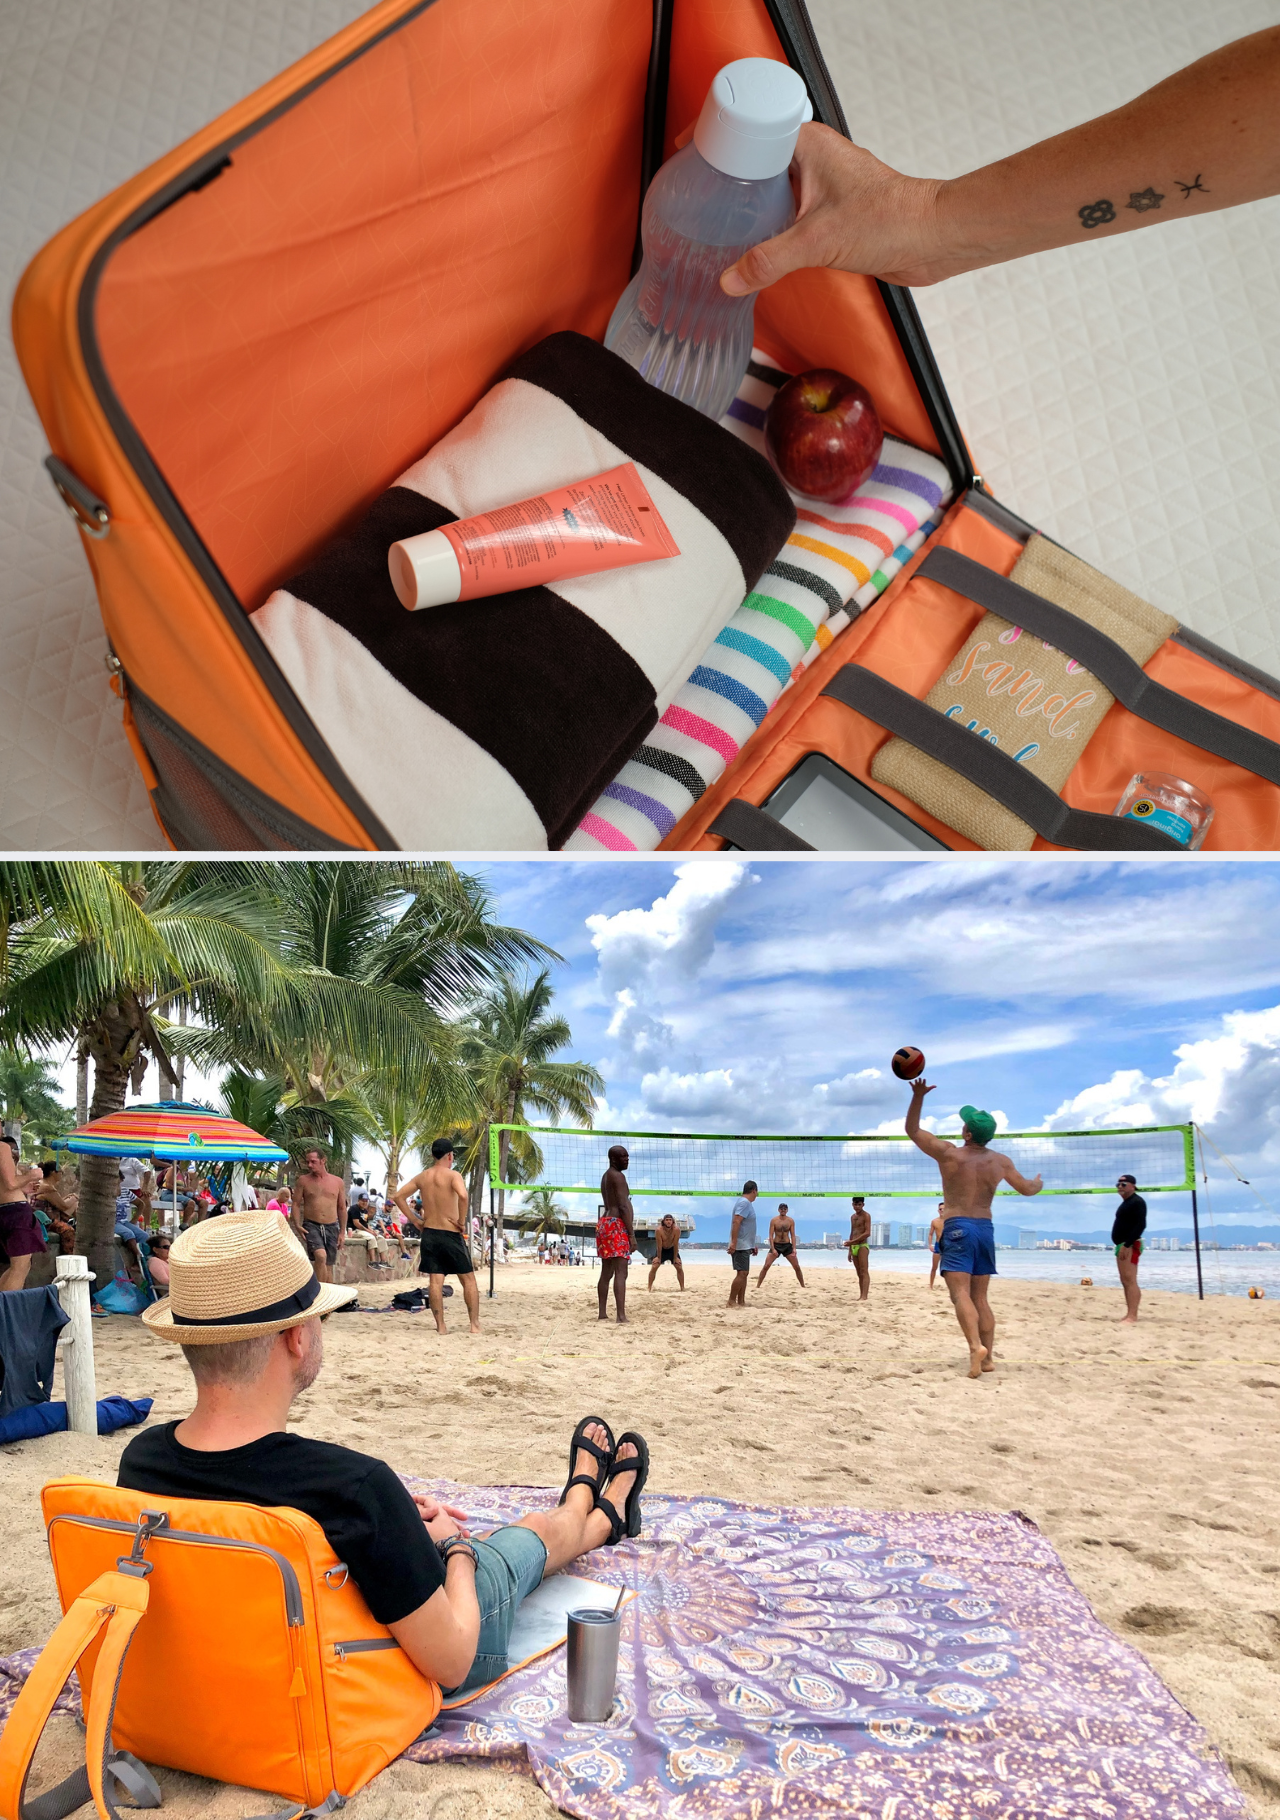 Two photos: top photo shows Playamigo ground chair packed for a day at the pool or beach. Bottom photo shows a man in a hat watching a sand volleyball game while using his Playamigo beach chair.